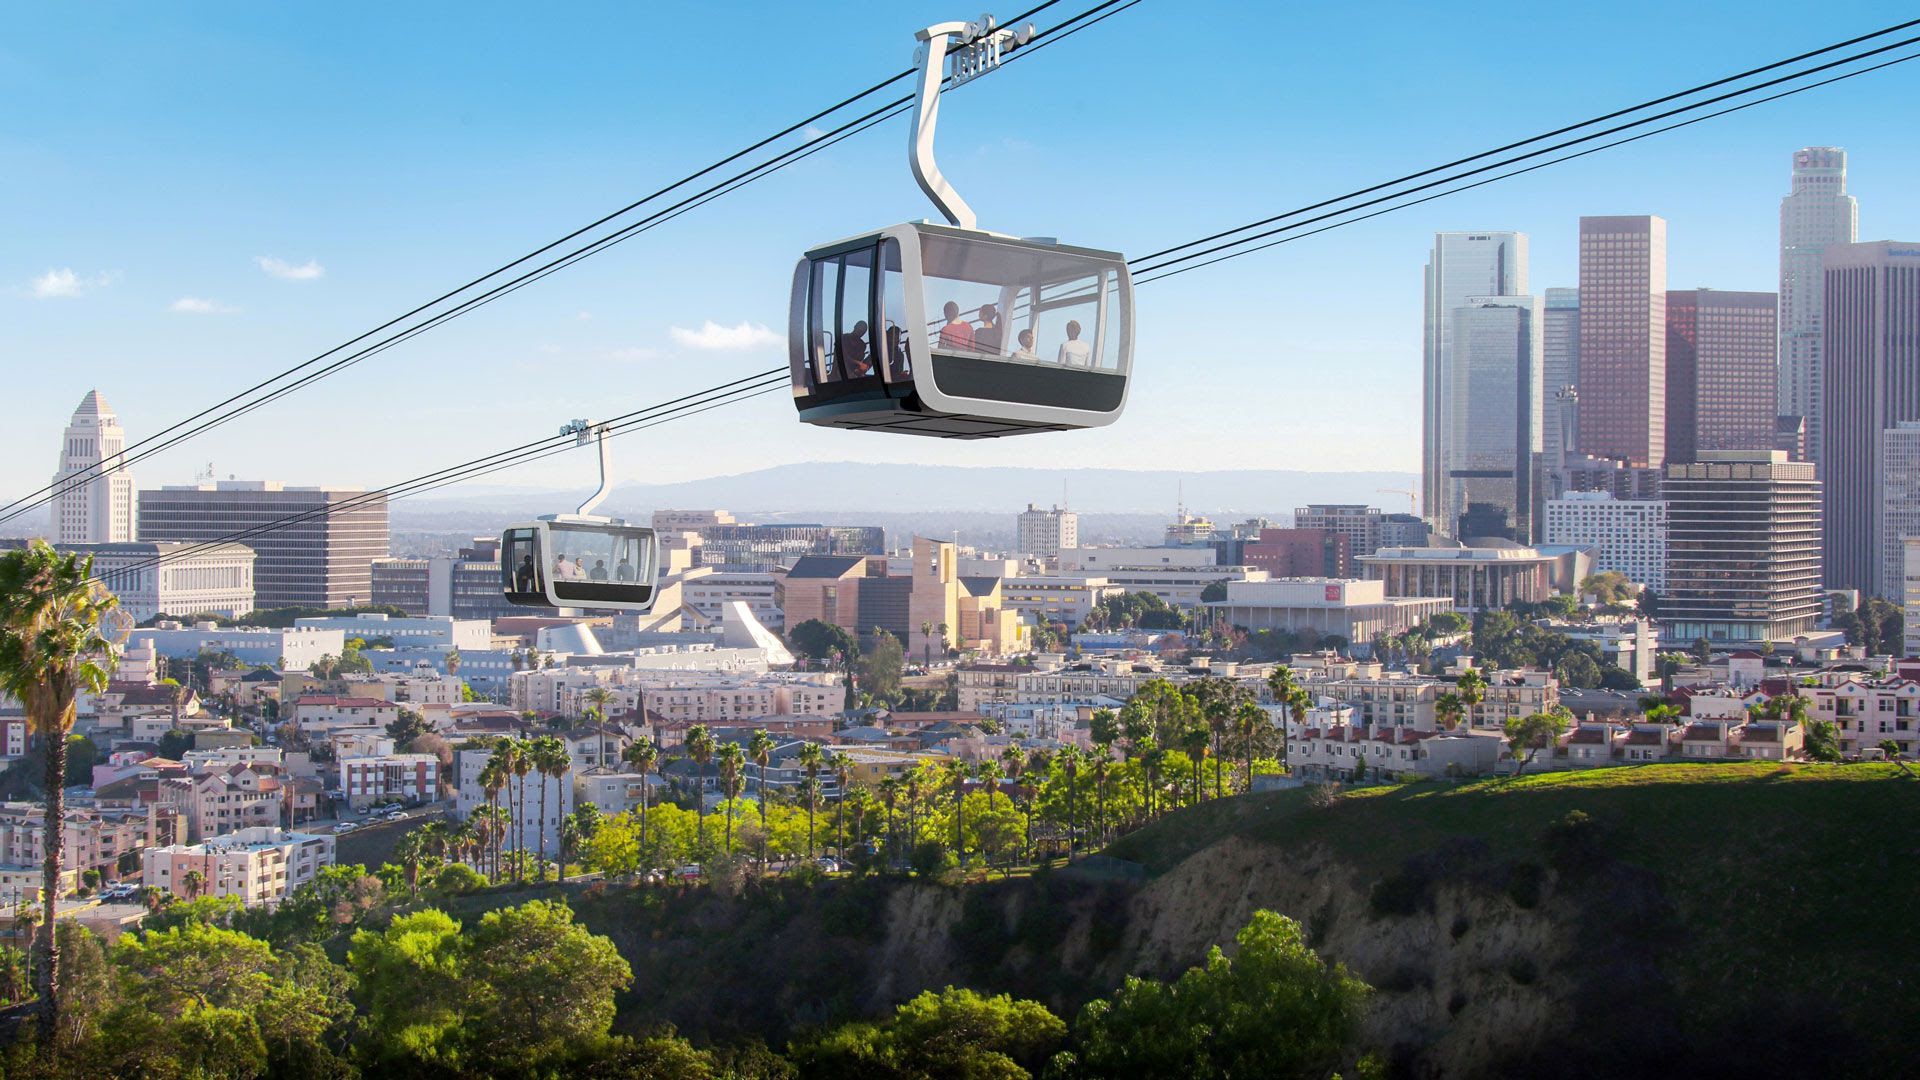 Rendering of an air gondola system proposed for Dodger Stadium in Los Angeles, per the Los Angeles County Metropolitan Transportation Authority.